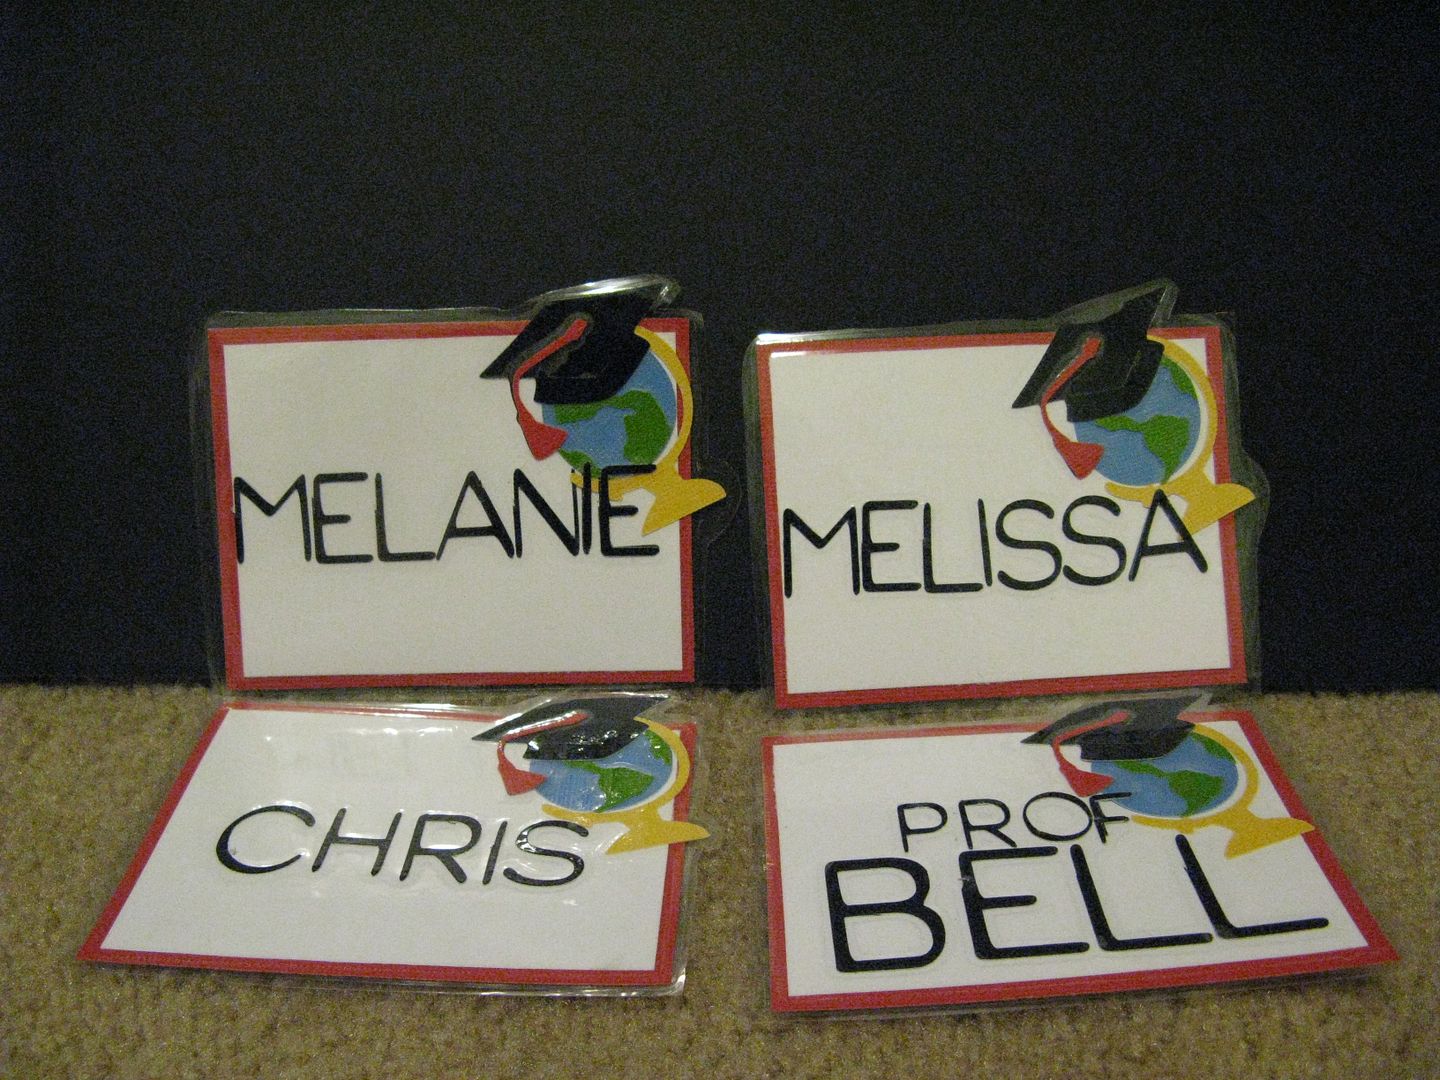 Designs For Name Tags. the name tags I have made